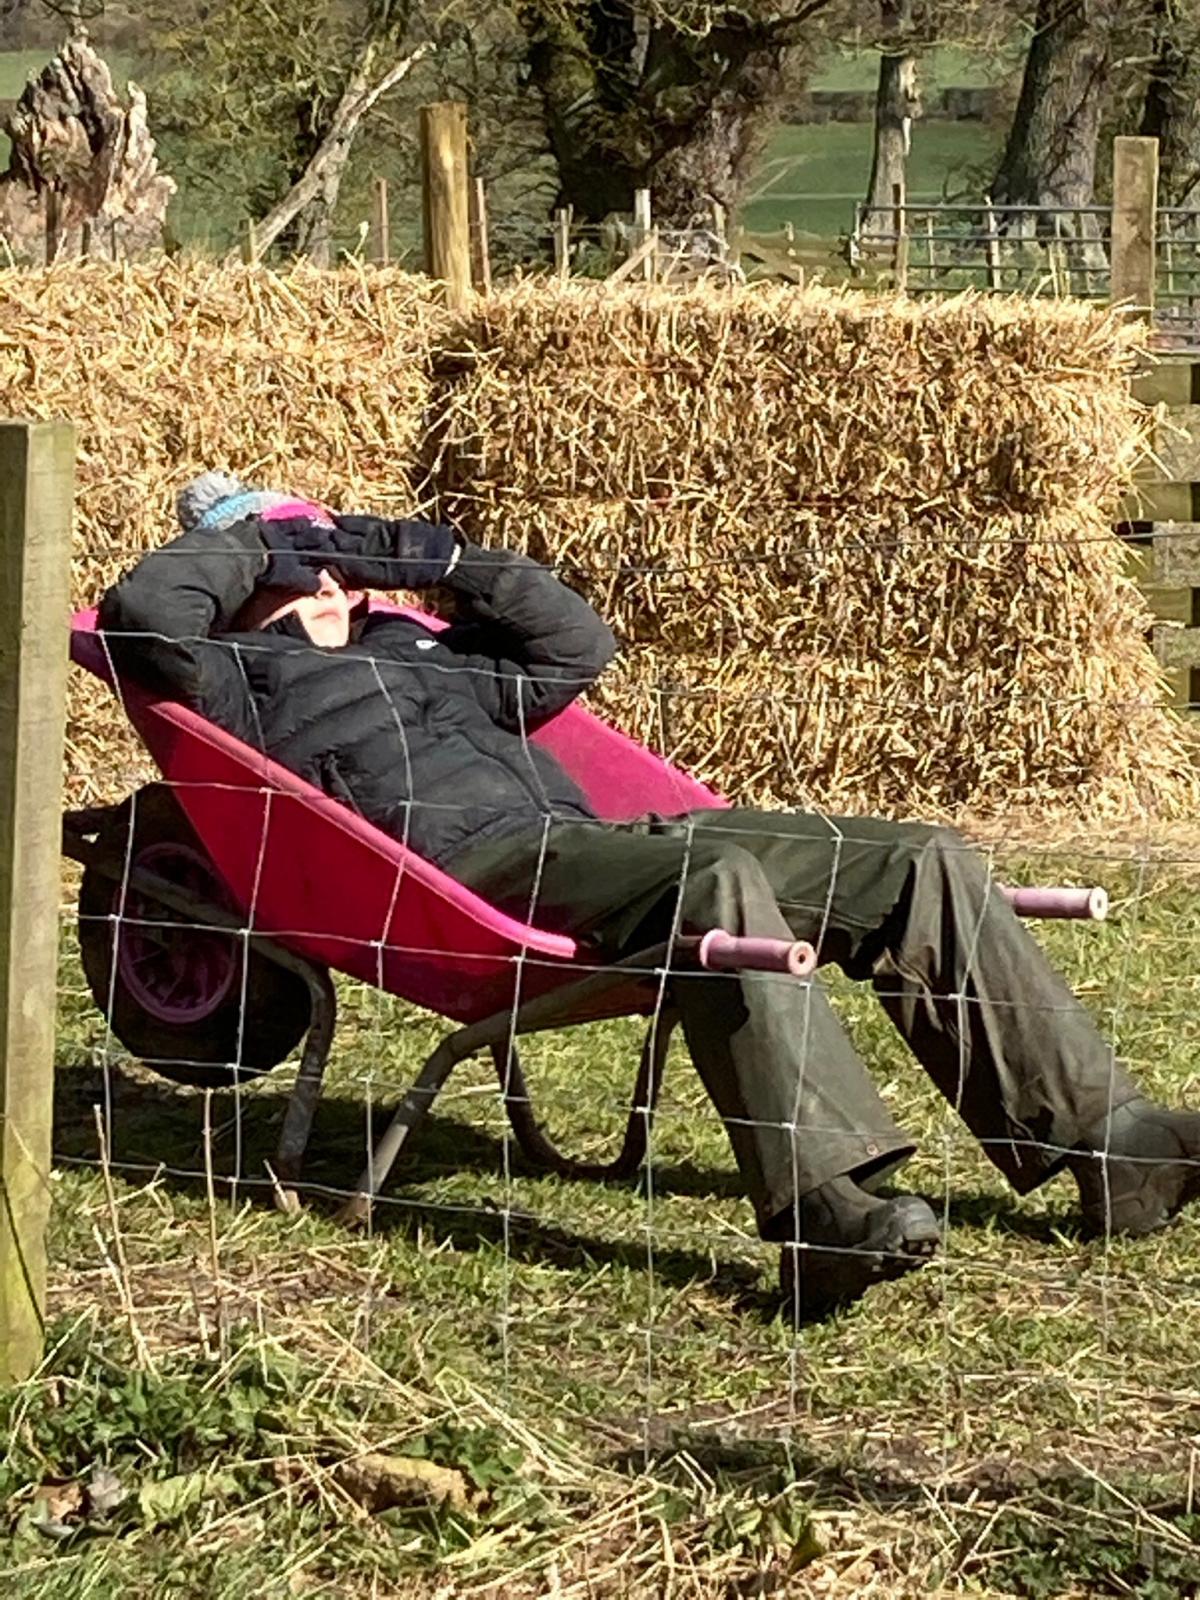 Helen Rogerson - The life of a shepherdess is a hard one!